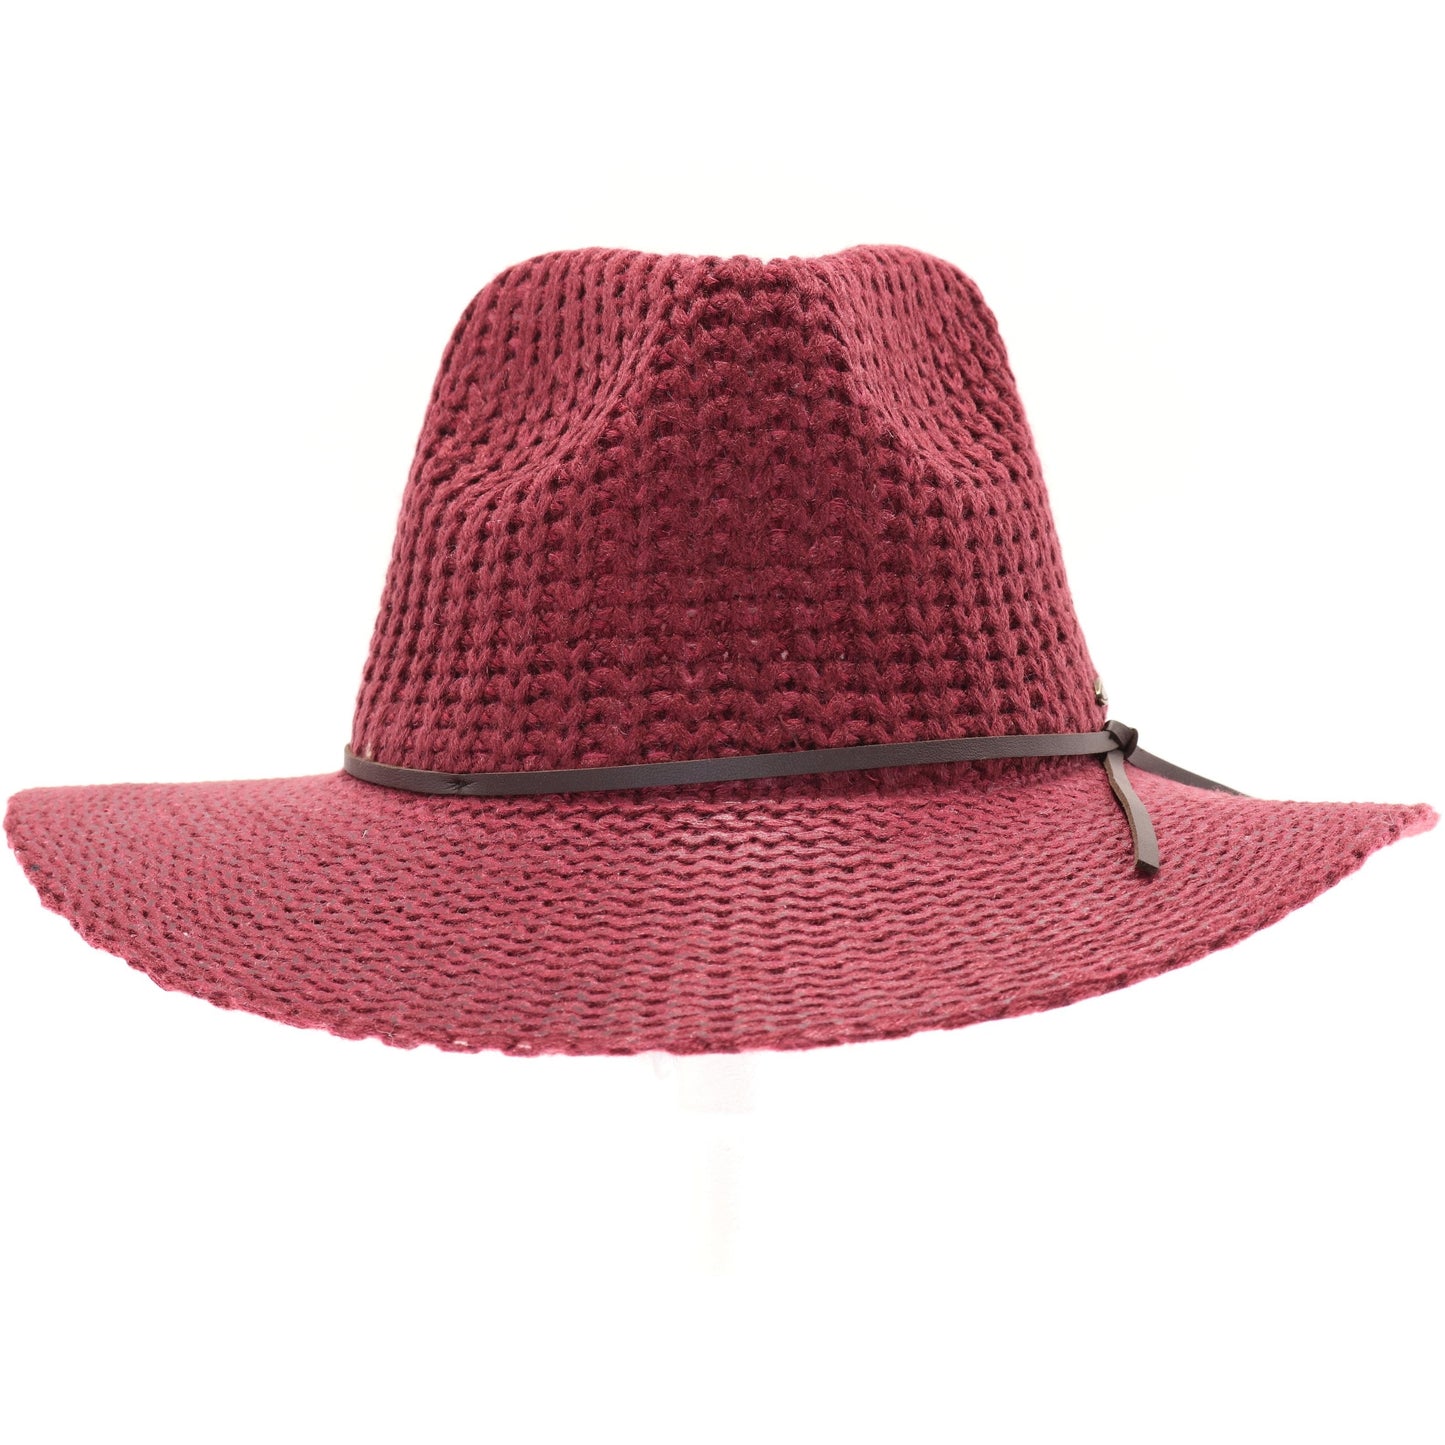 Knit Fedora Hat with Leather Cord